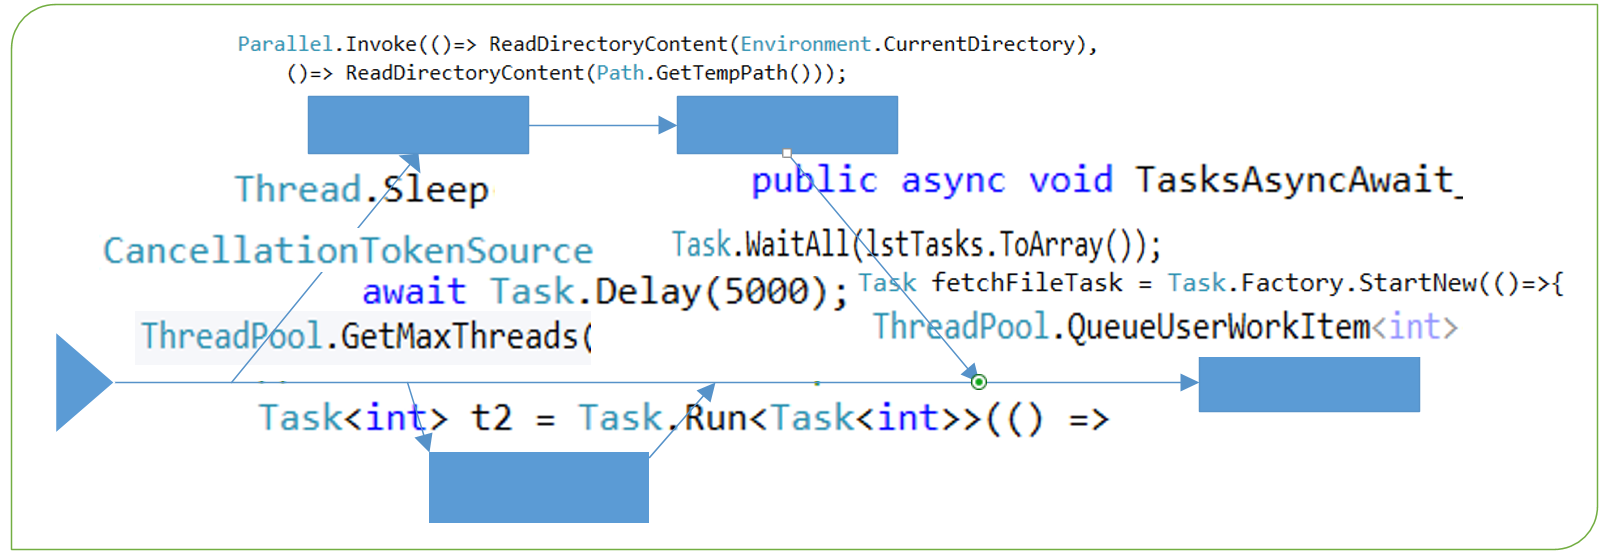 Overview of C# Async Programming with Thread pools and Task Parallel  Library | by Lior Shalom | DevTechBlogs | Medium